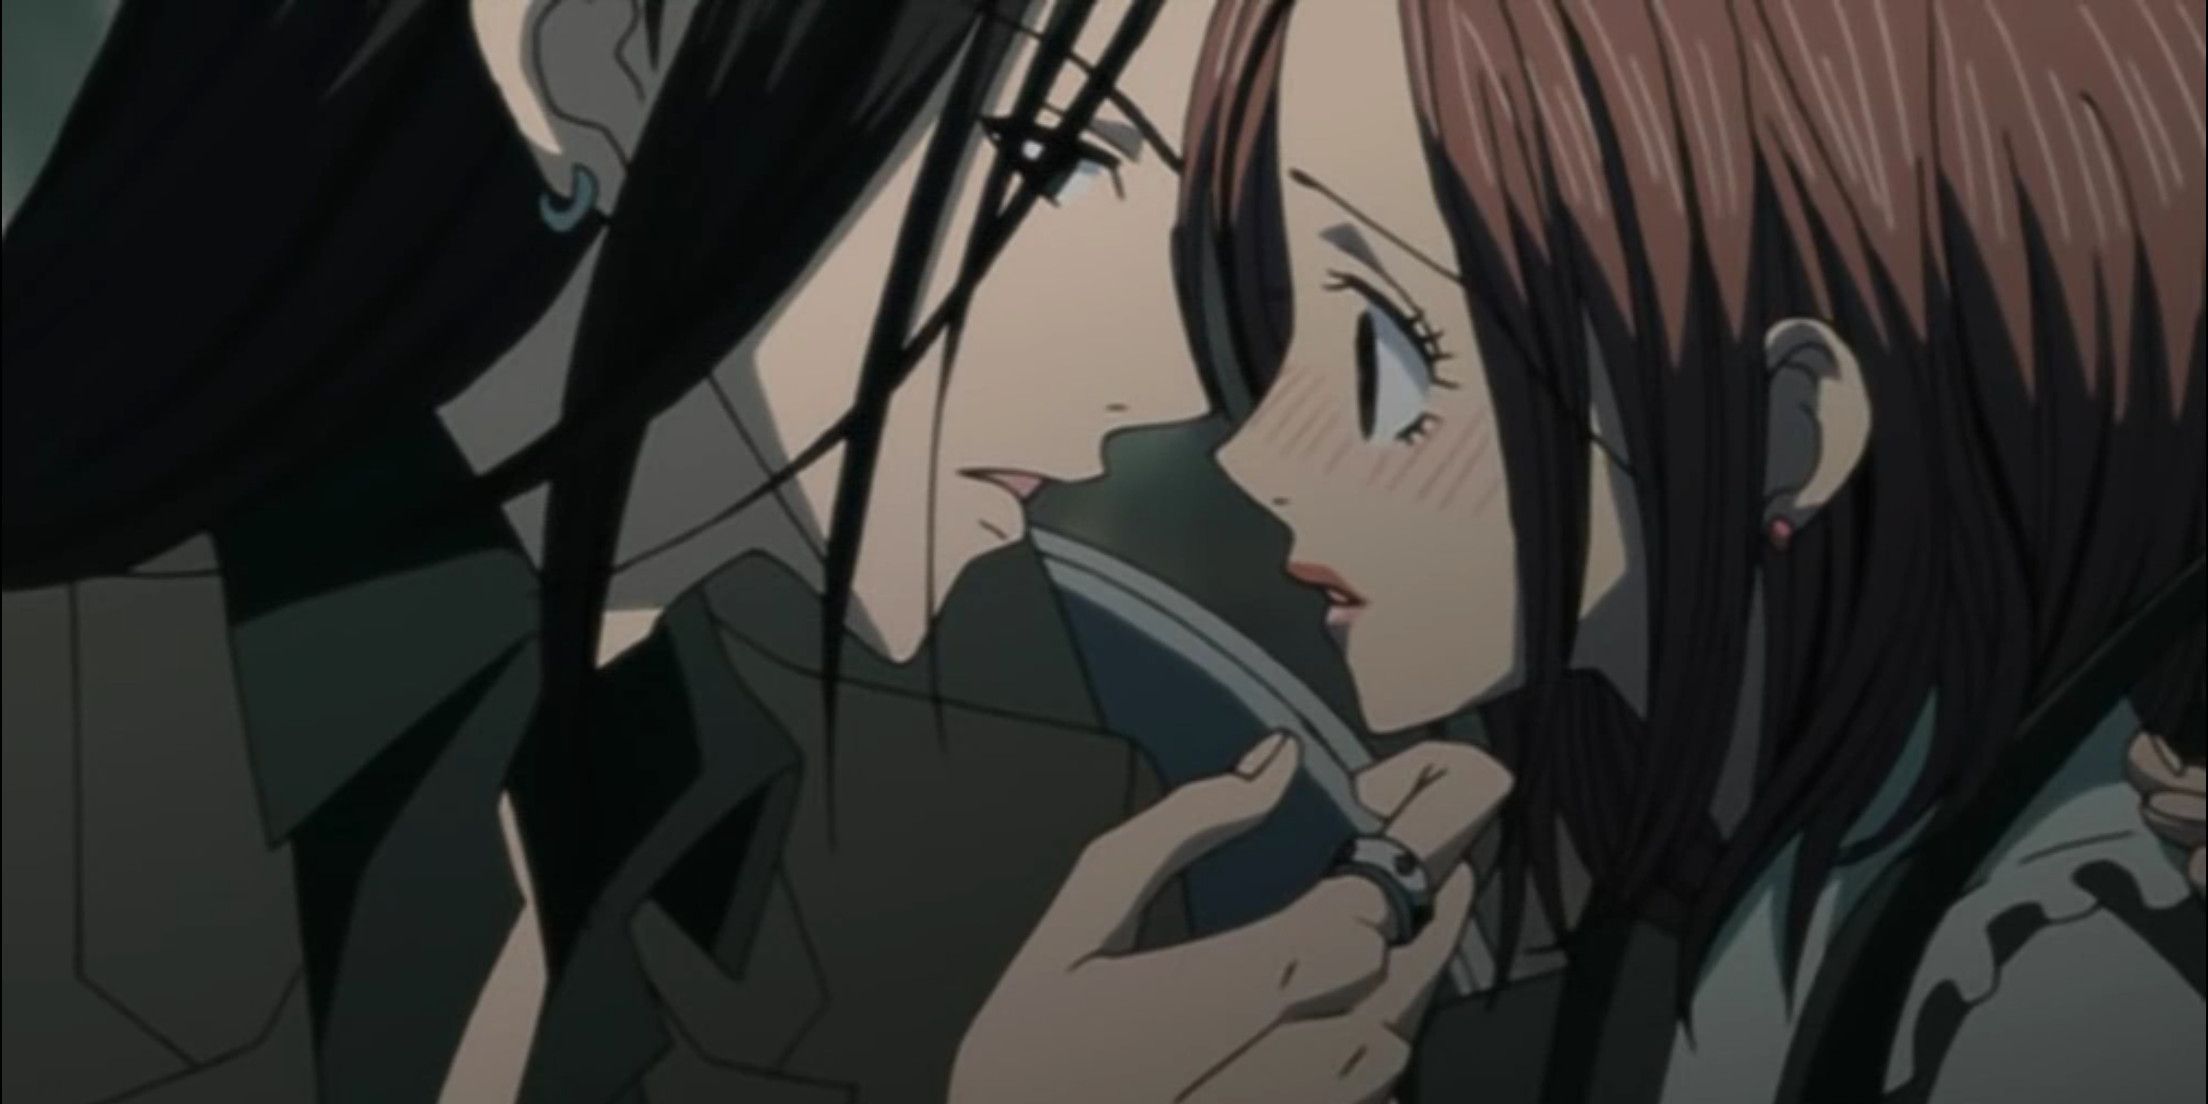 Best Romance Anime From the Mid-2000s